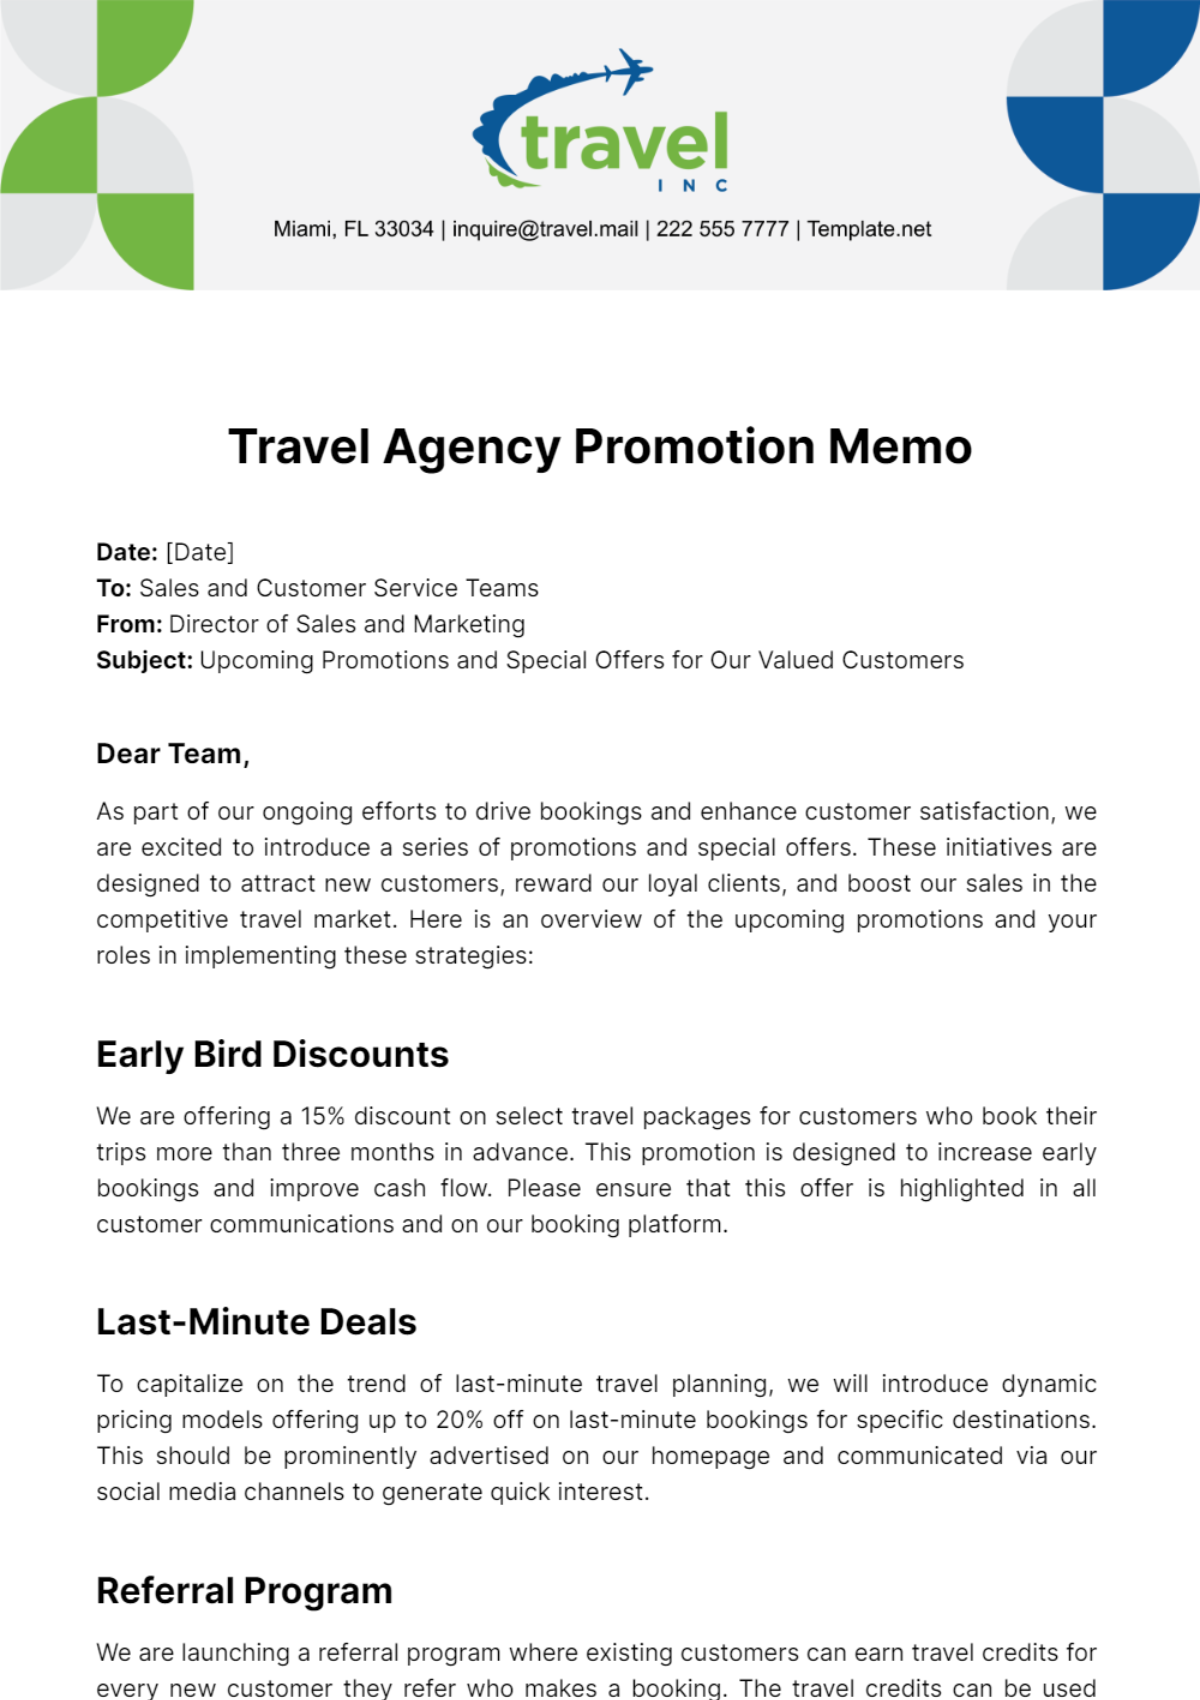 Travel Agency Promotion Memo Template